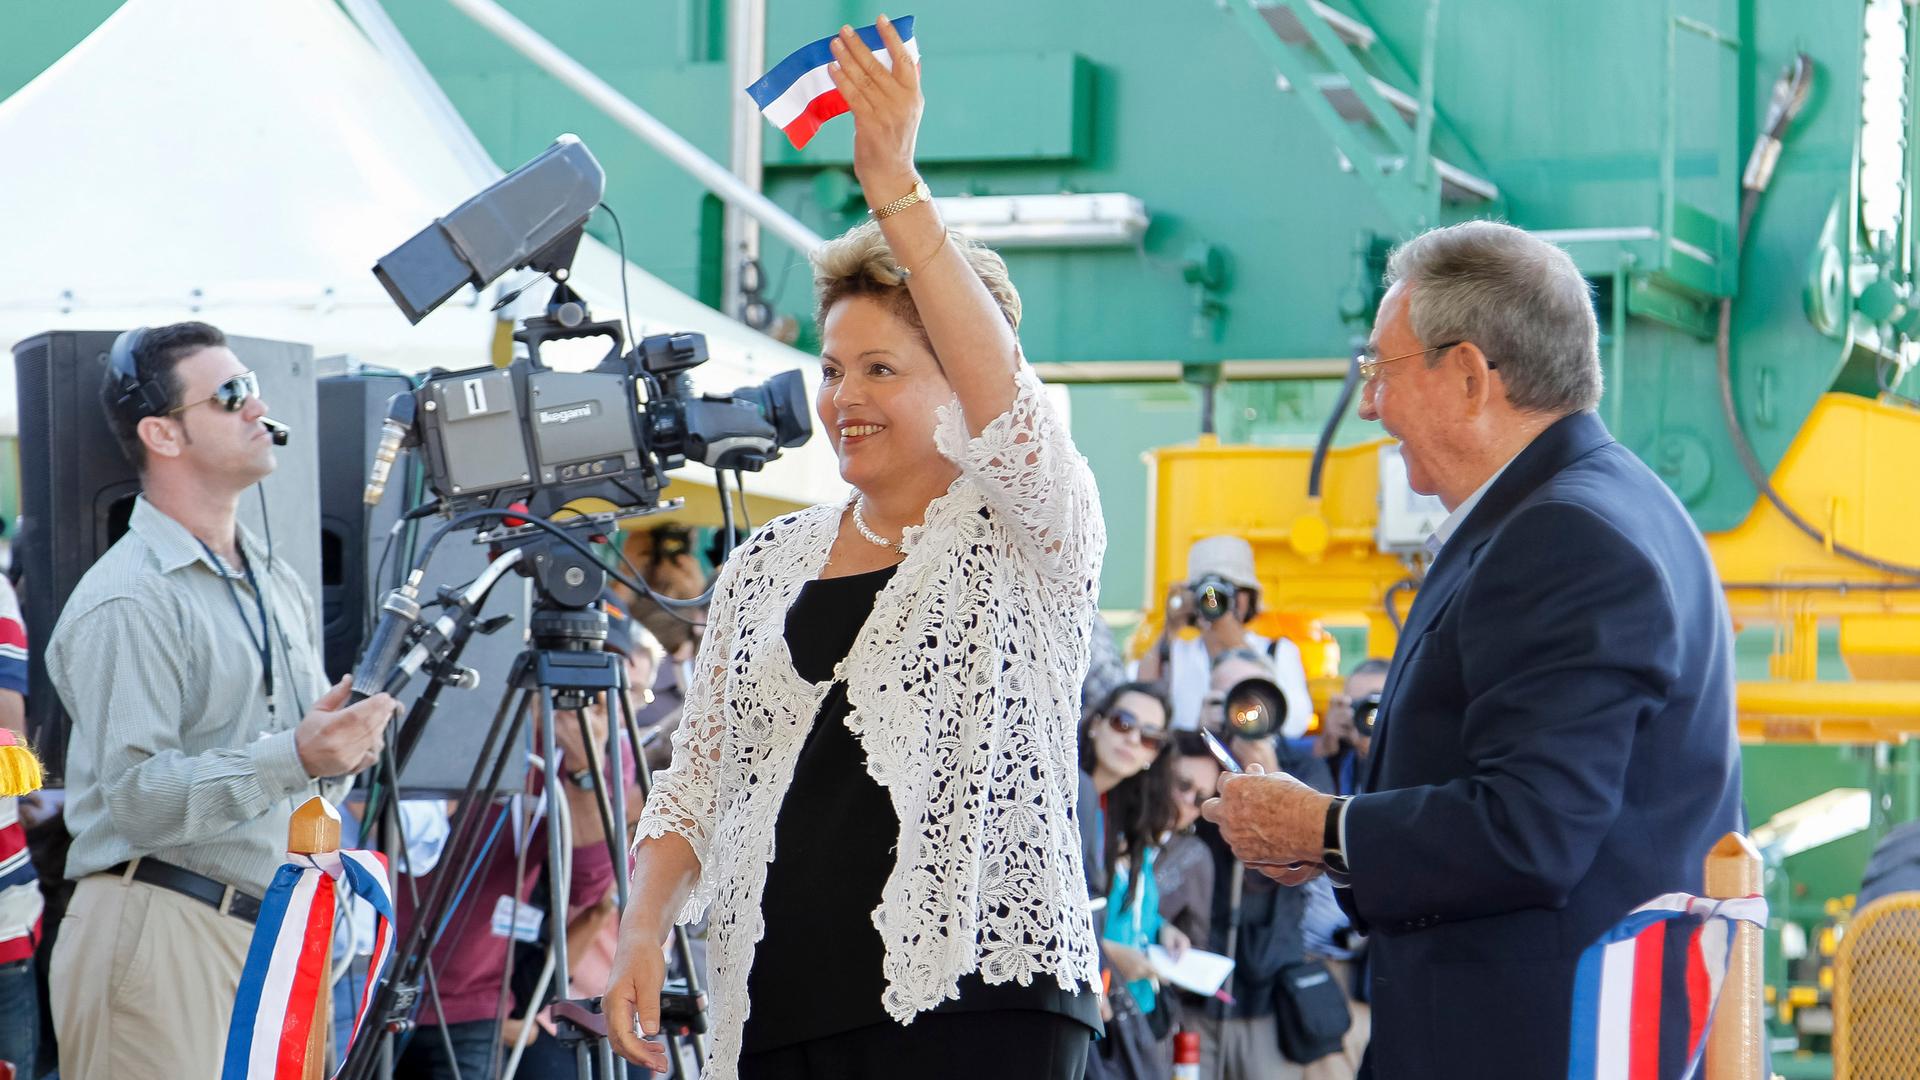 Brazil's President Dilma Rousseff and Cuban leader Raul Castro cut the ribbon of Cuba's new $957 million port, billed as the most modern in Latin America.